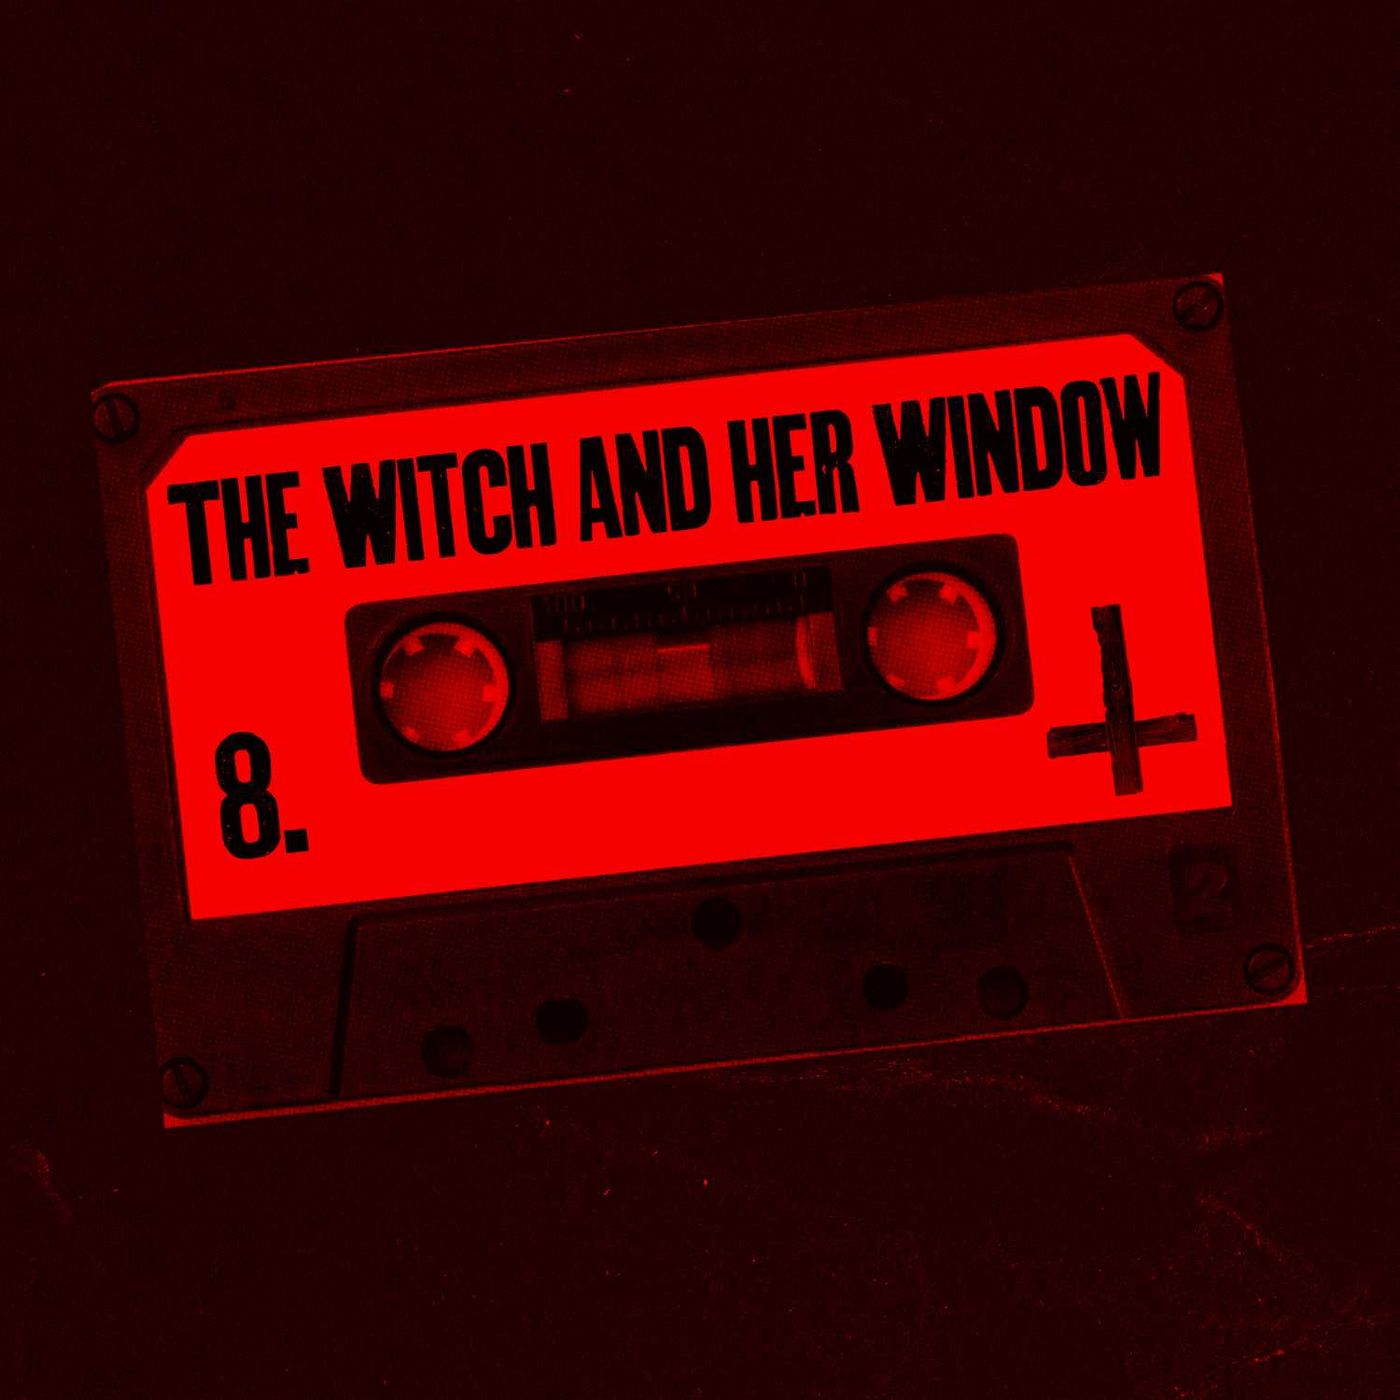 The Witch and her Window S1 E8